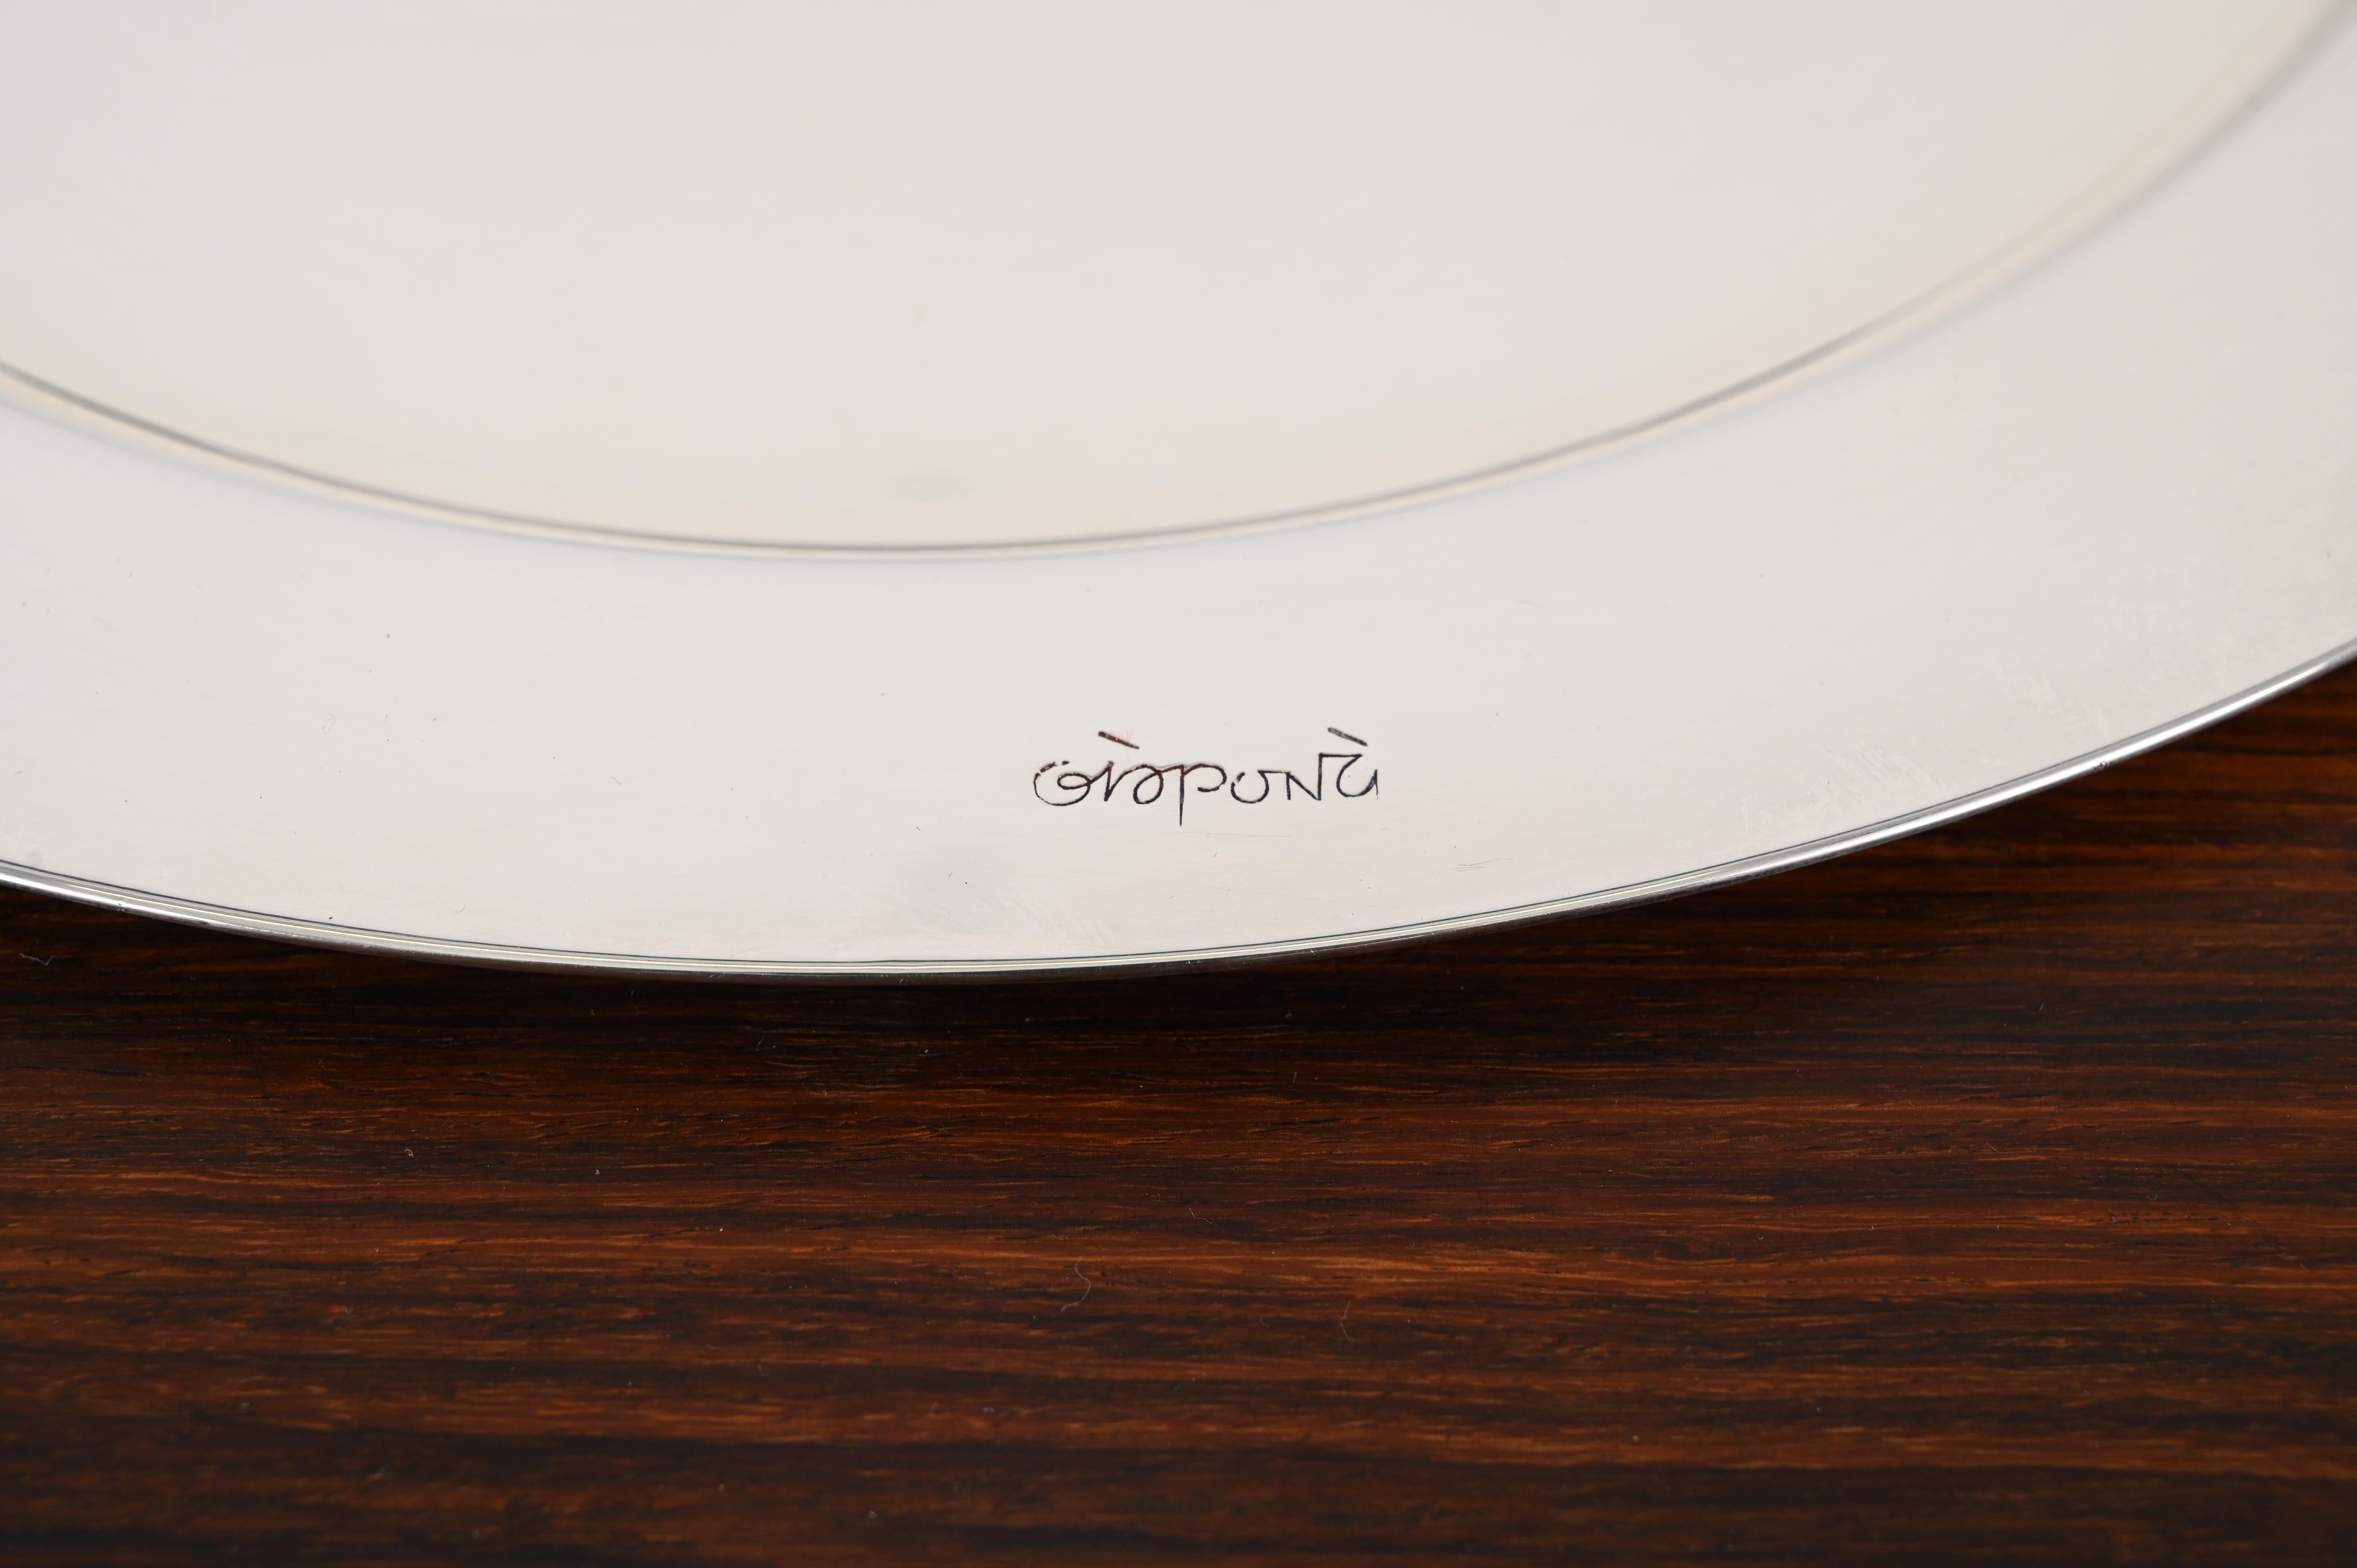 Mid-Century Modern Gio Ponti for Cleto Munari Modernist Silver Plated Serving Plate Italy, 1980s For Sale